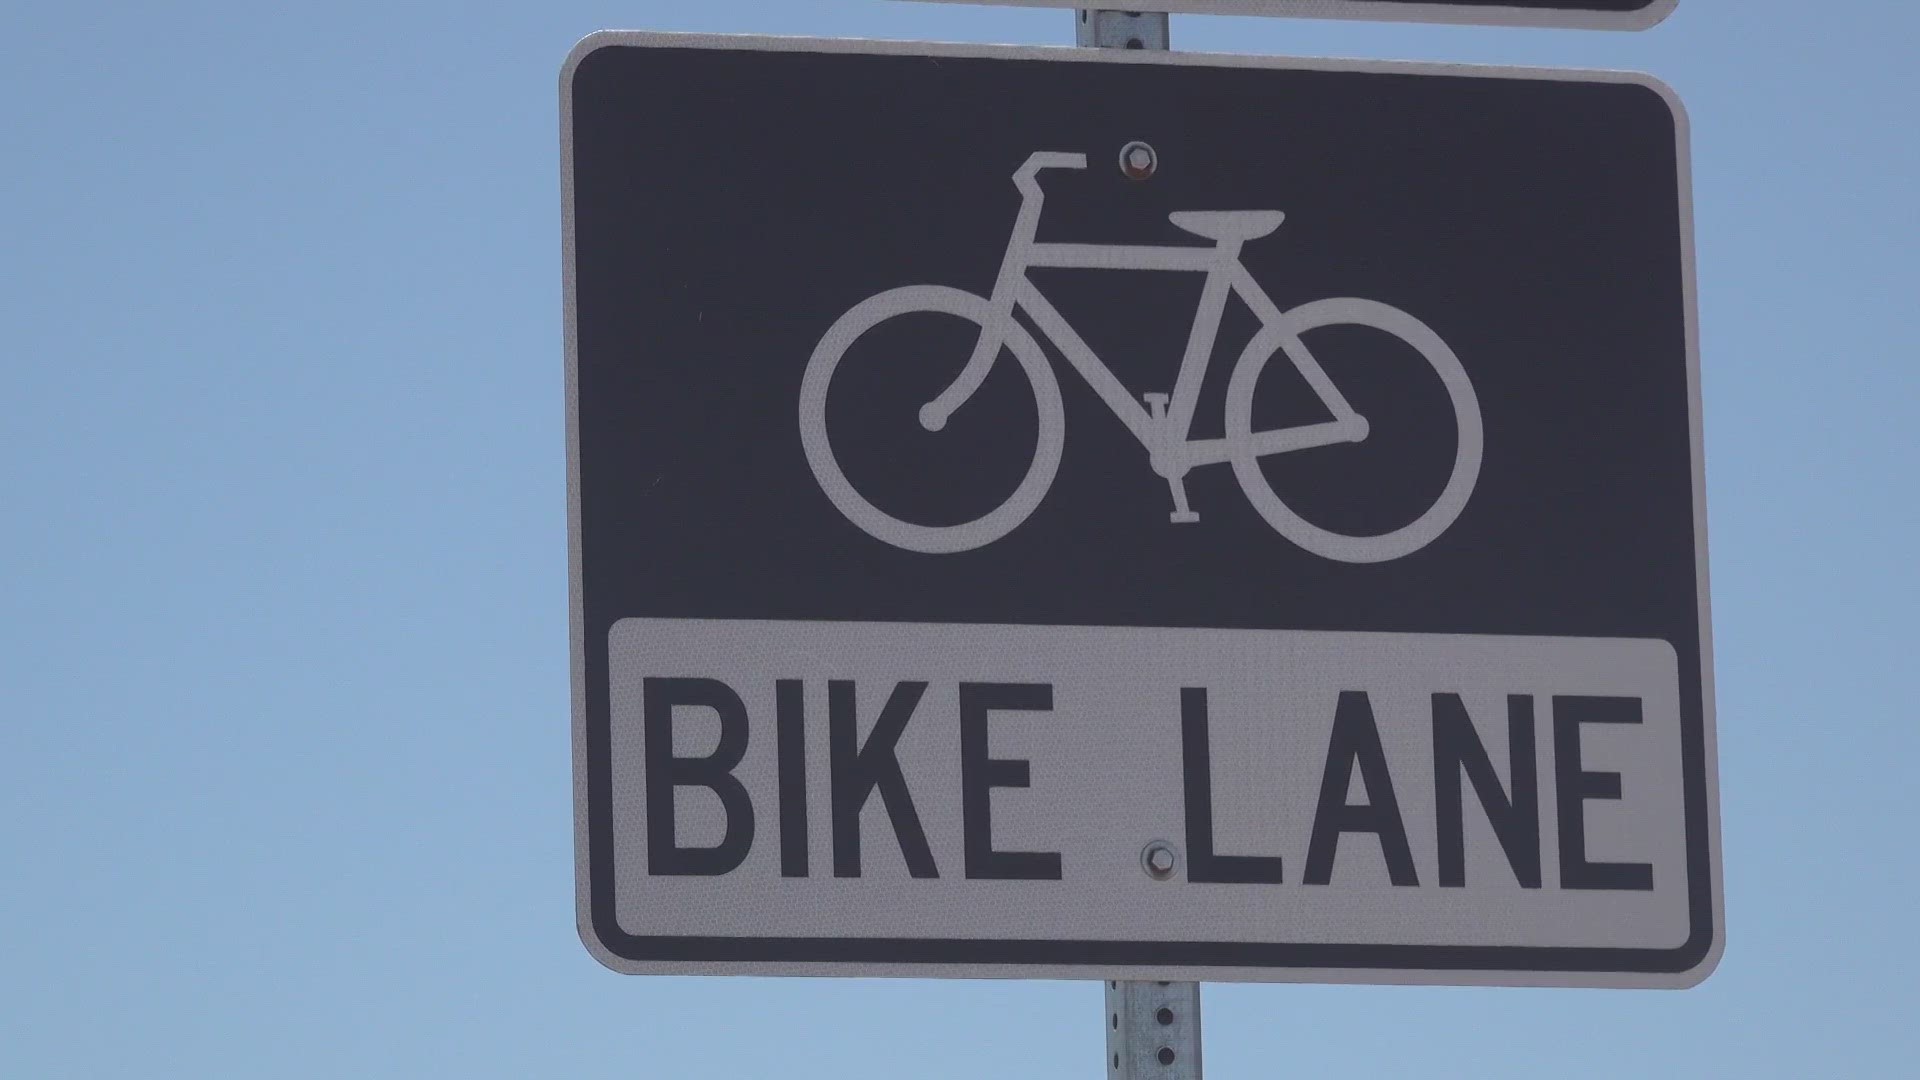 The goal is ultimately to have a hike and bike trail that connects Midland and Odessa.